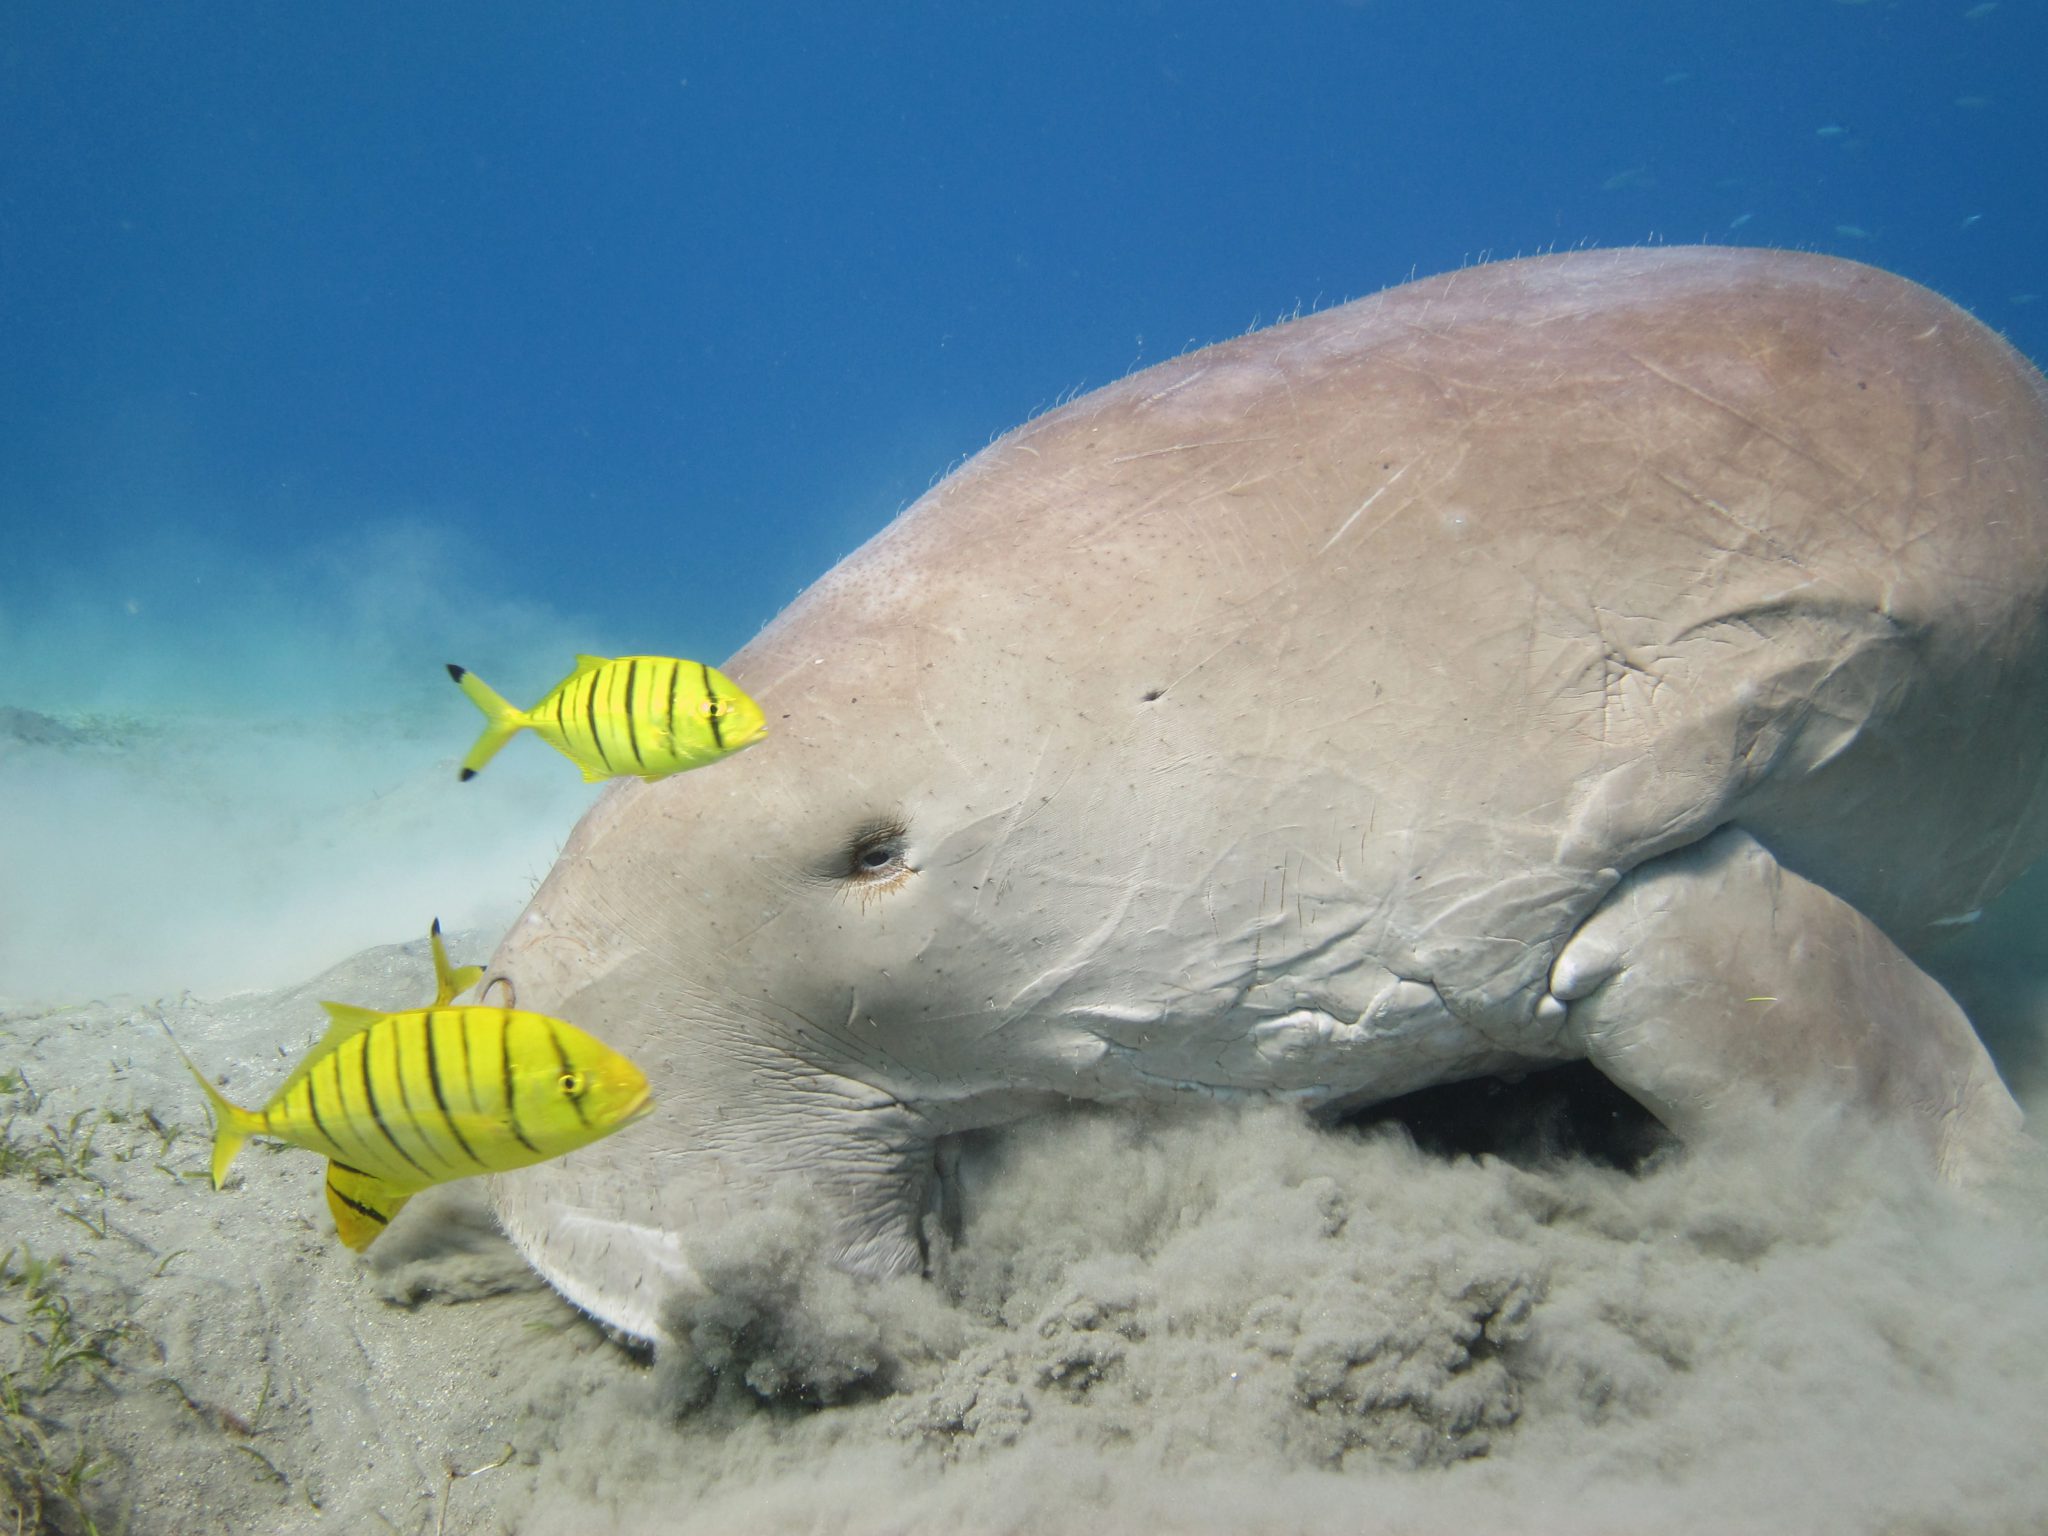 diving with dugong in egypt, a hotspot for large endangered marine animals